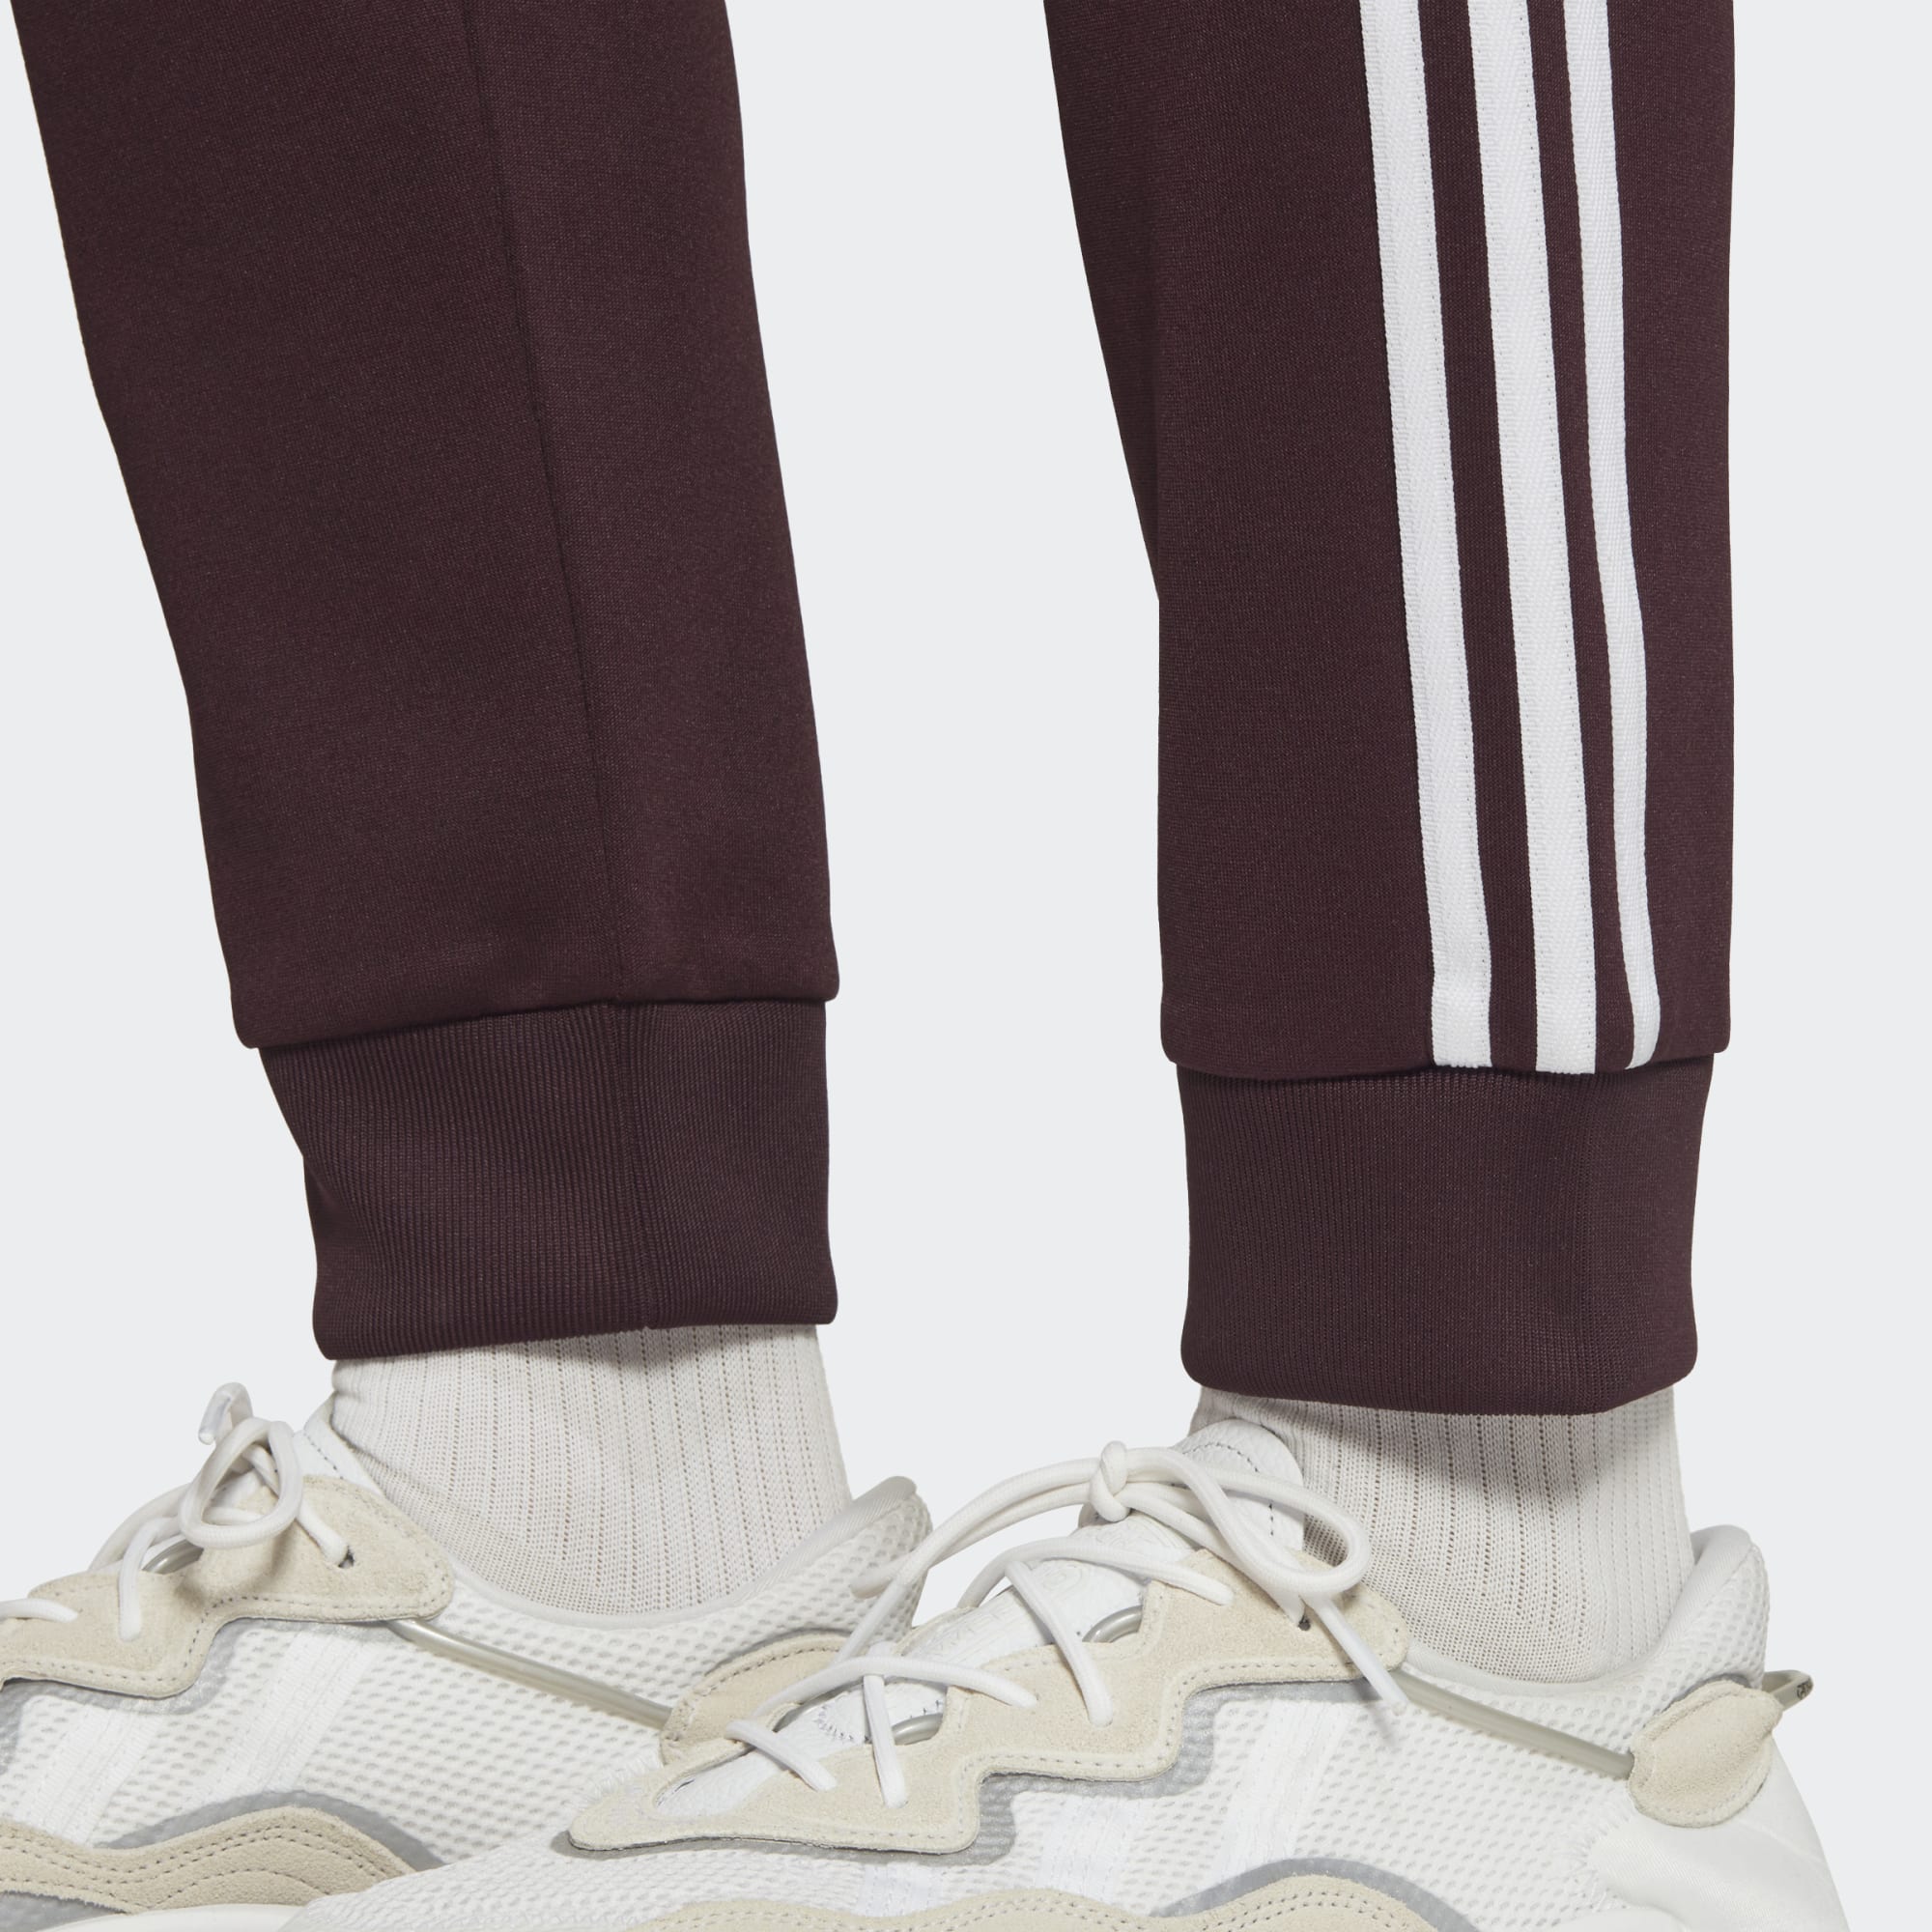  adidas Originals Men's Adicolor Classics Superstar Track Pants,  Shadow Maroon/White, Small : Clothing, Shoes & Jewelry